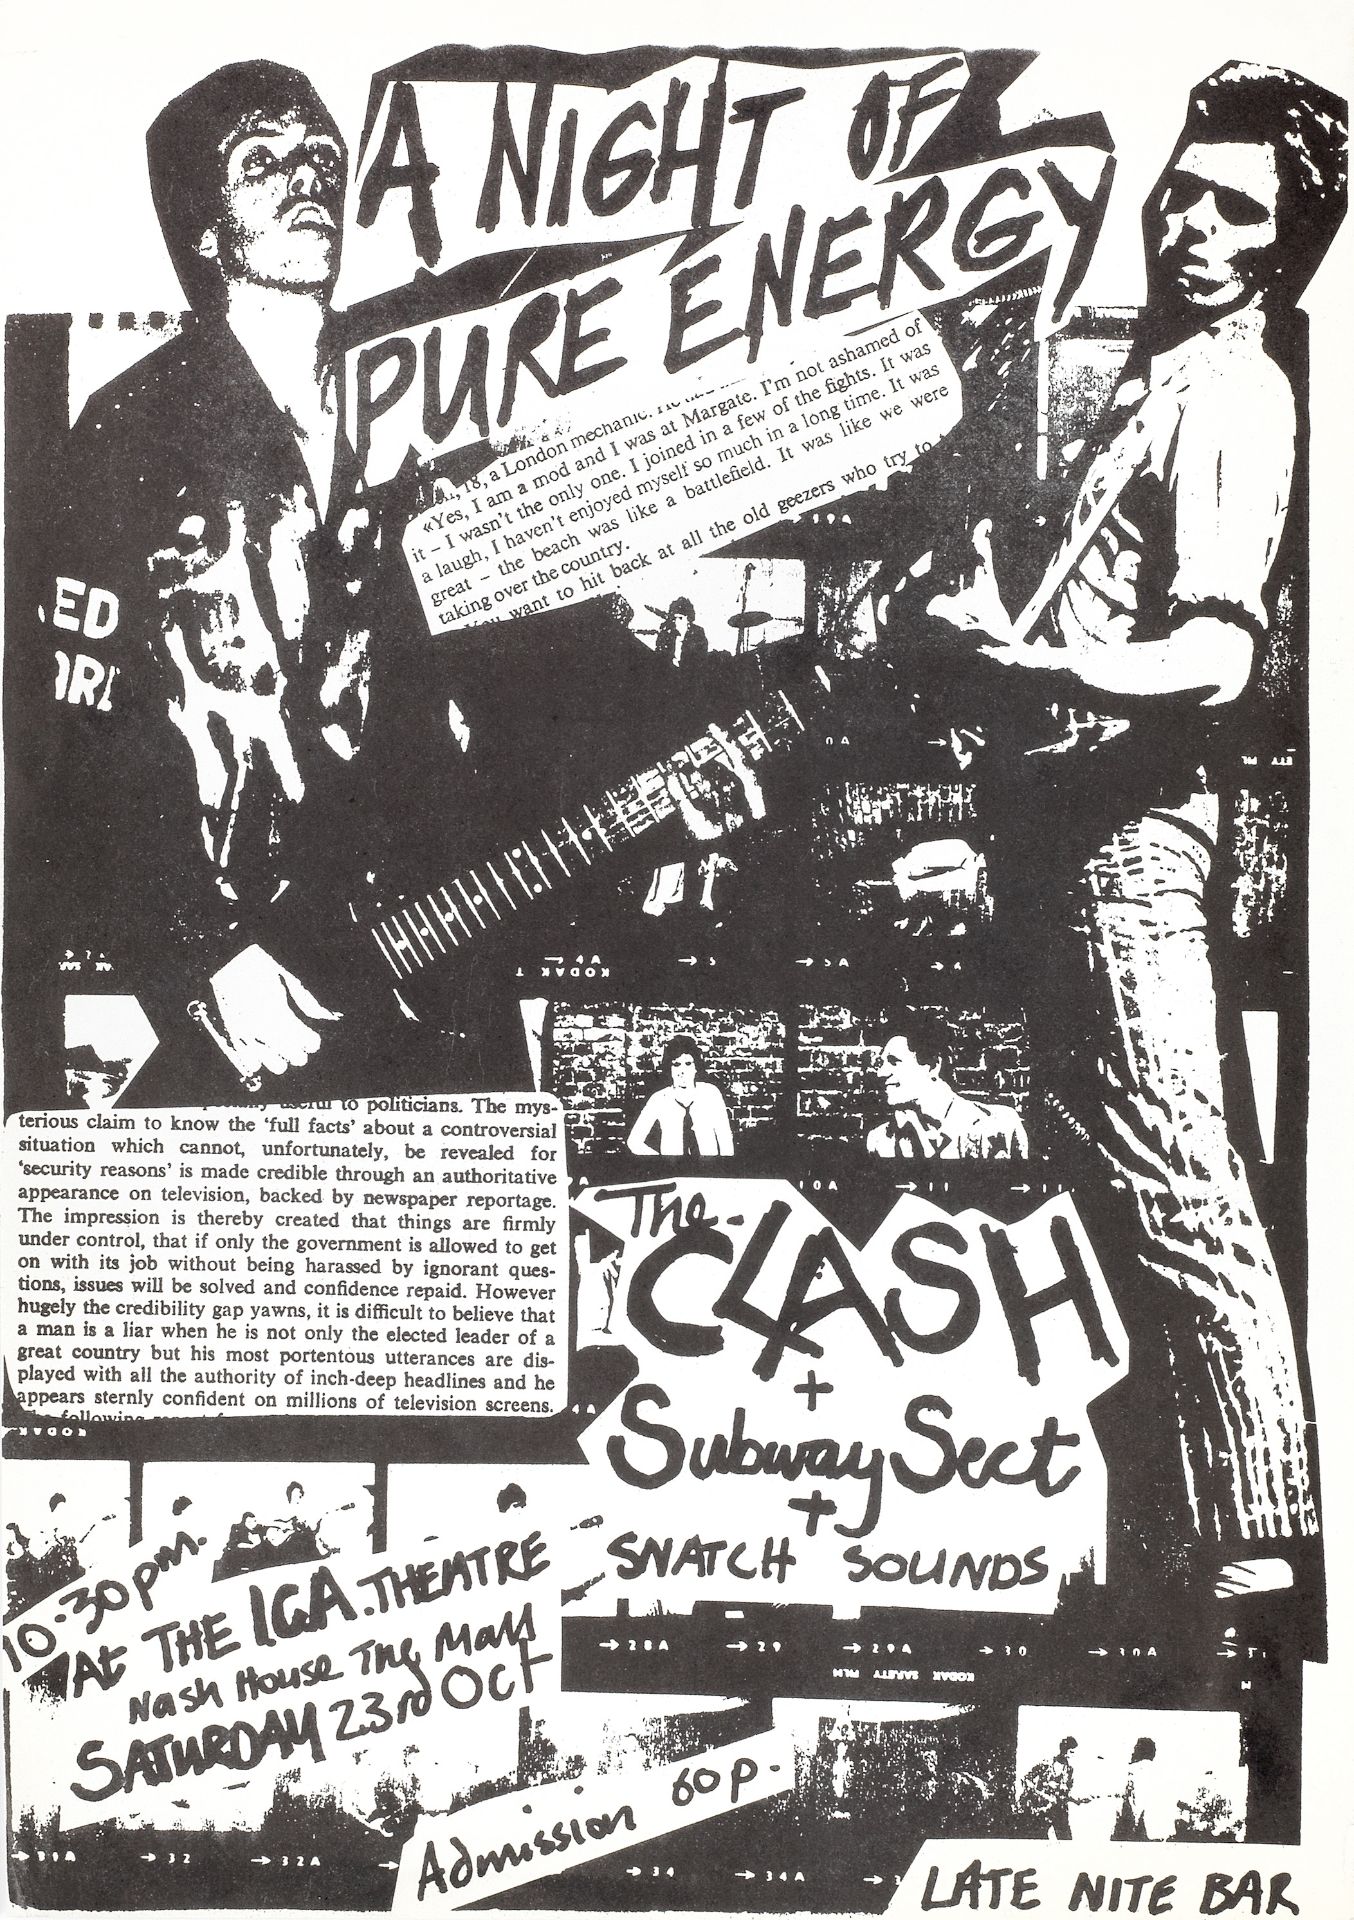 The Clash A Concert Flyer For 'A Night Of Pure Energy', at the ICA Theatre, London, 23rd October ...